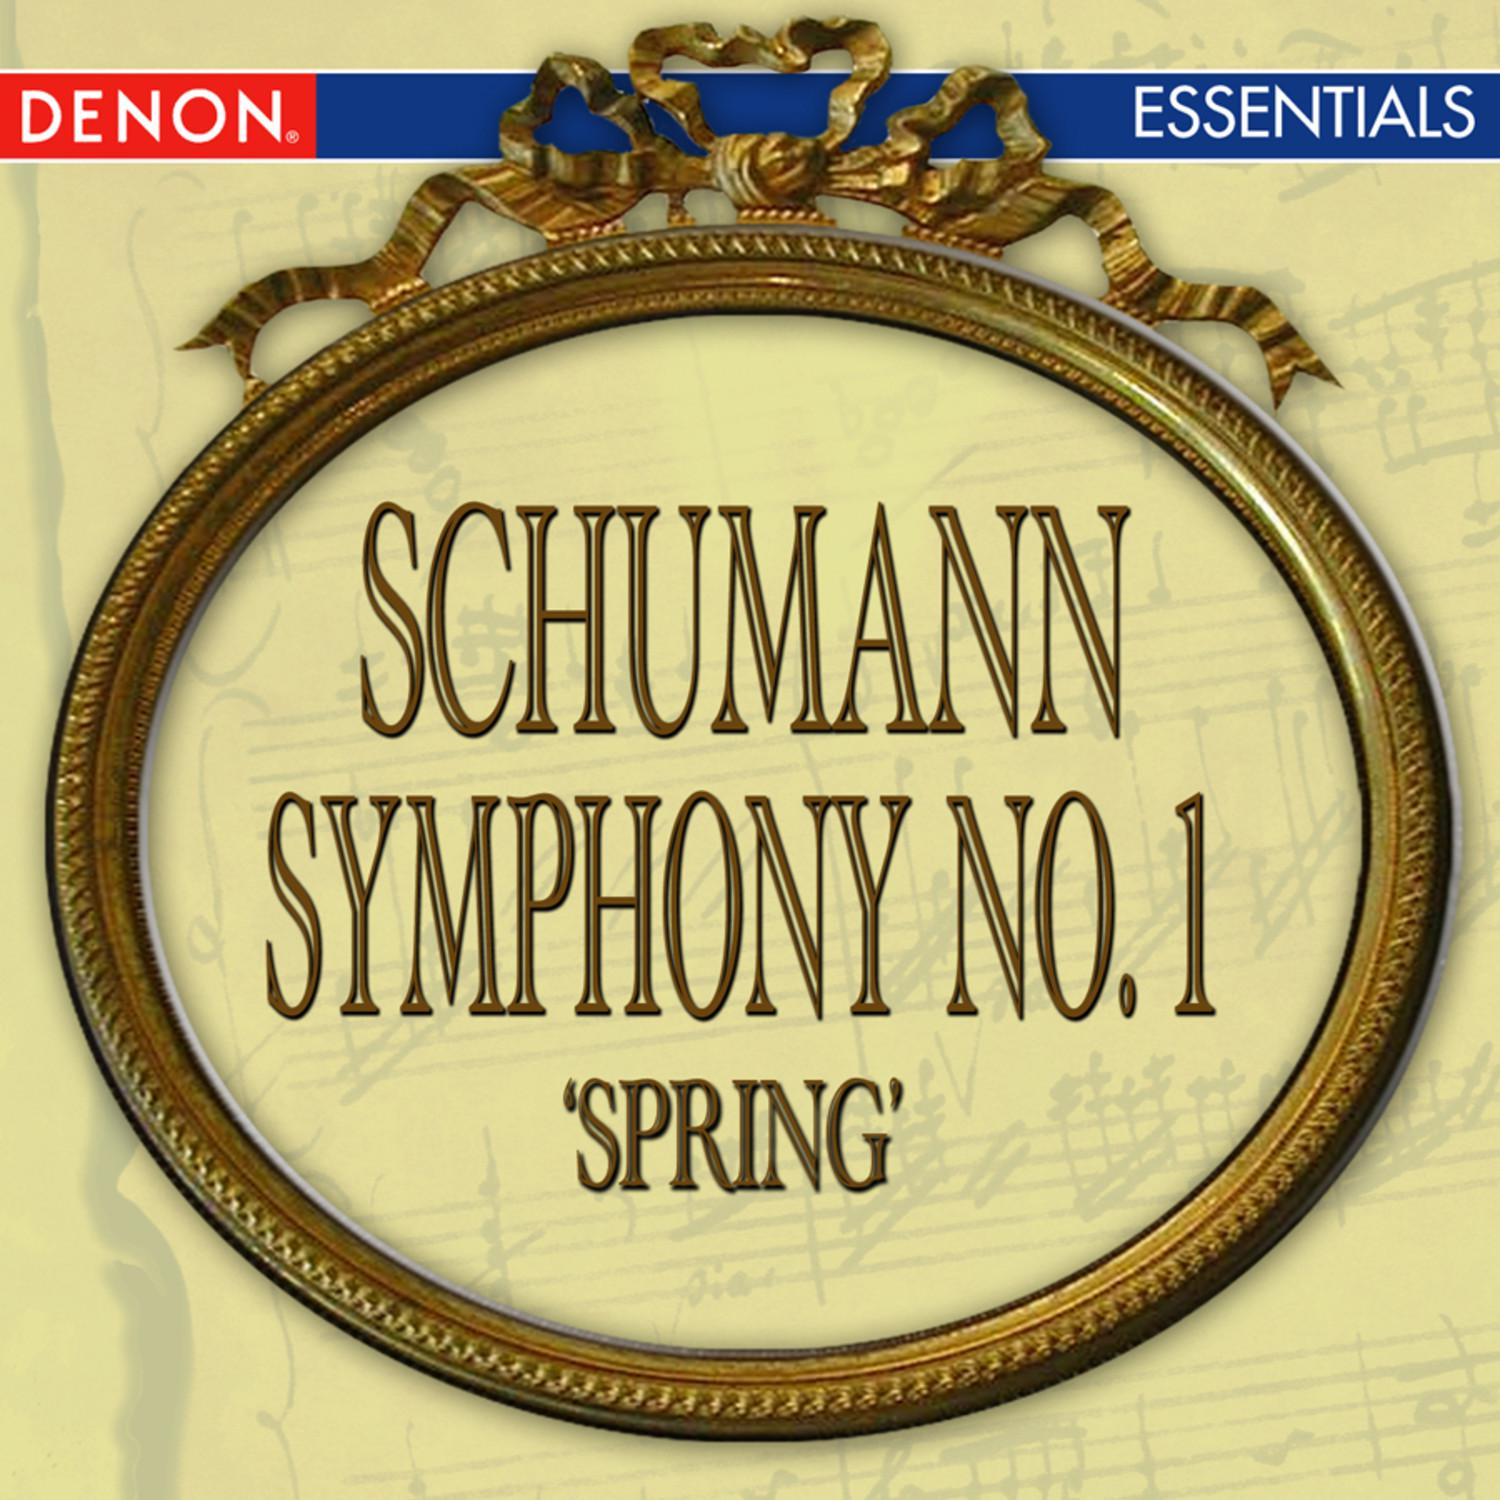 Symphony No. 1 in B-Flat Major, Op. 38, "Spring": II. Larghetto